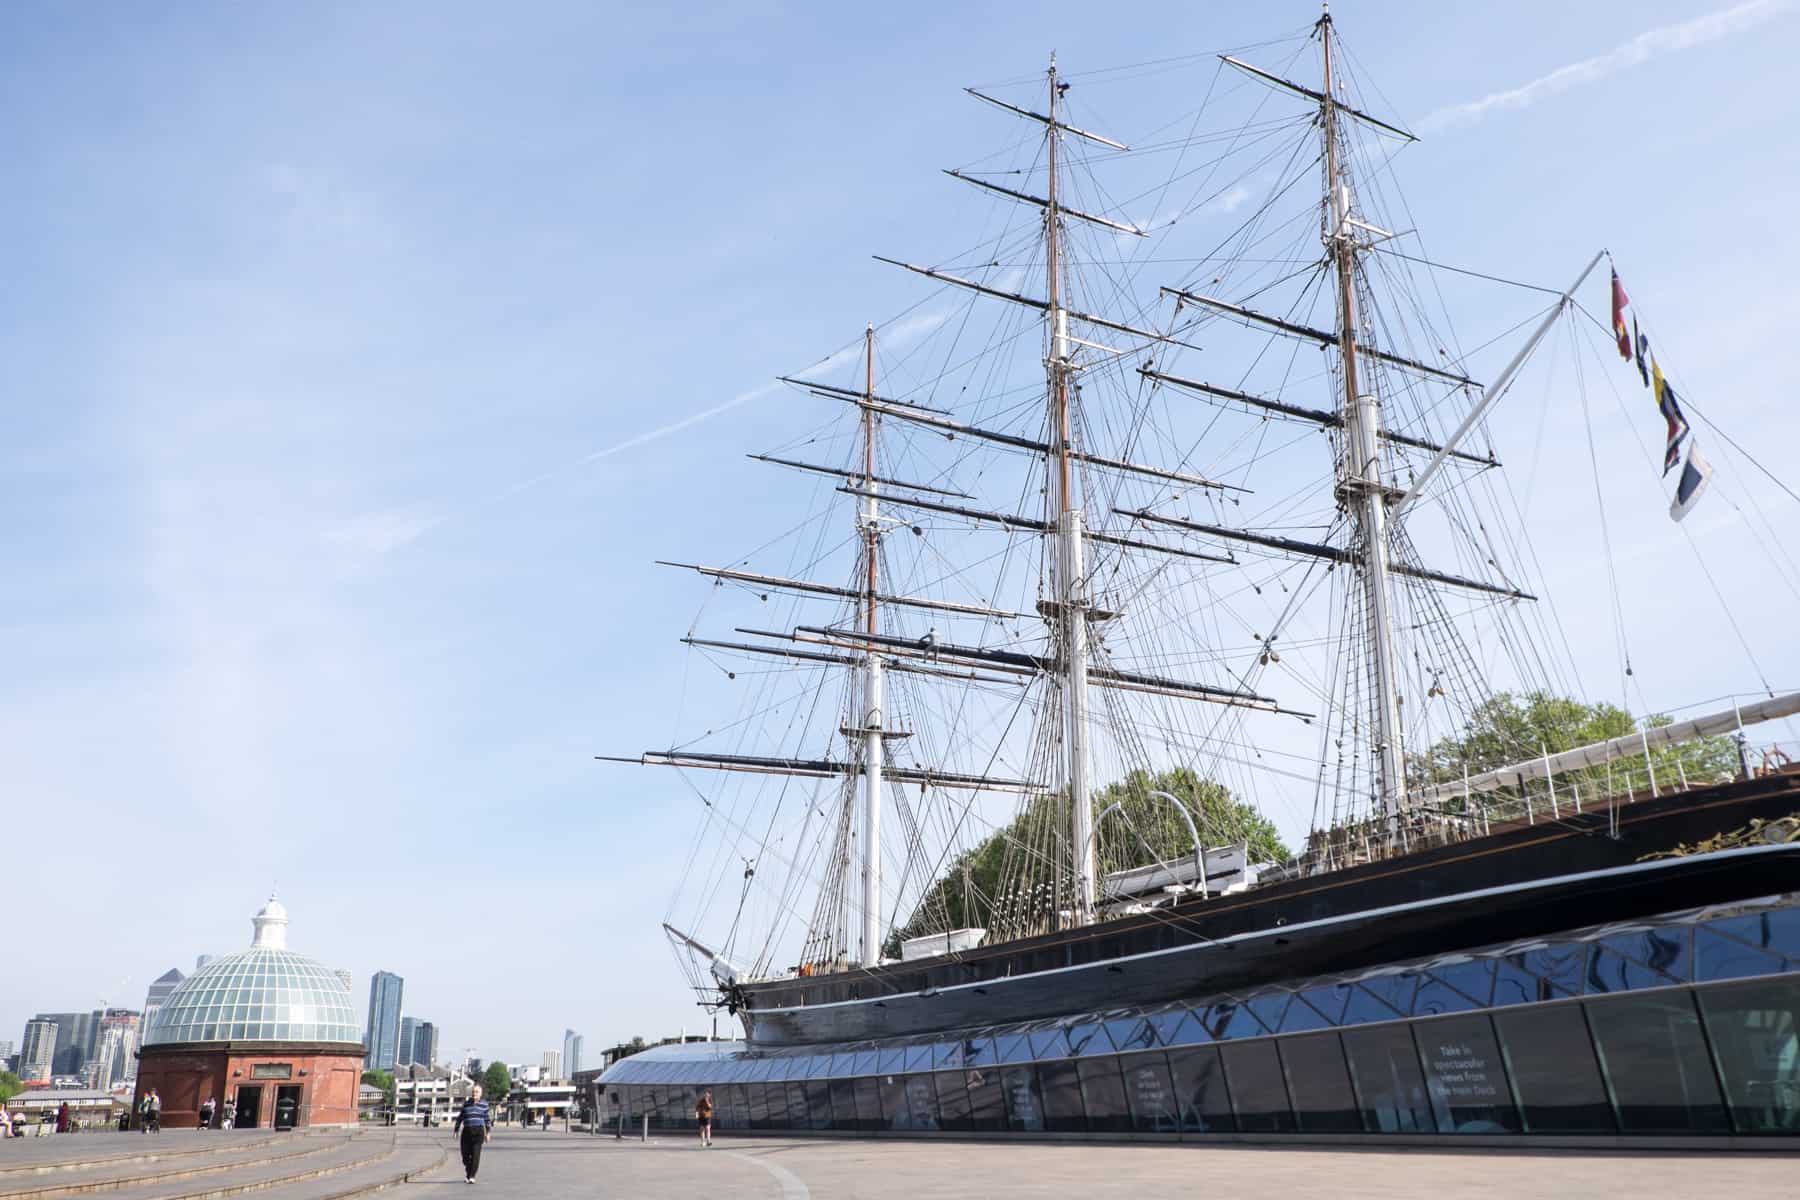 The huge vessel and masts of the Cutty Sark Tea Clipper standing in the middle of Greenwich, London.